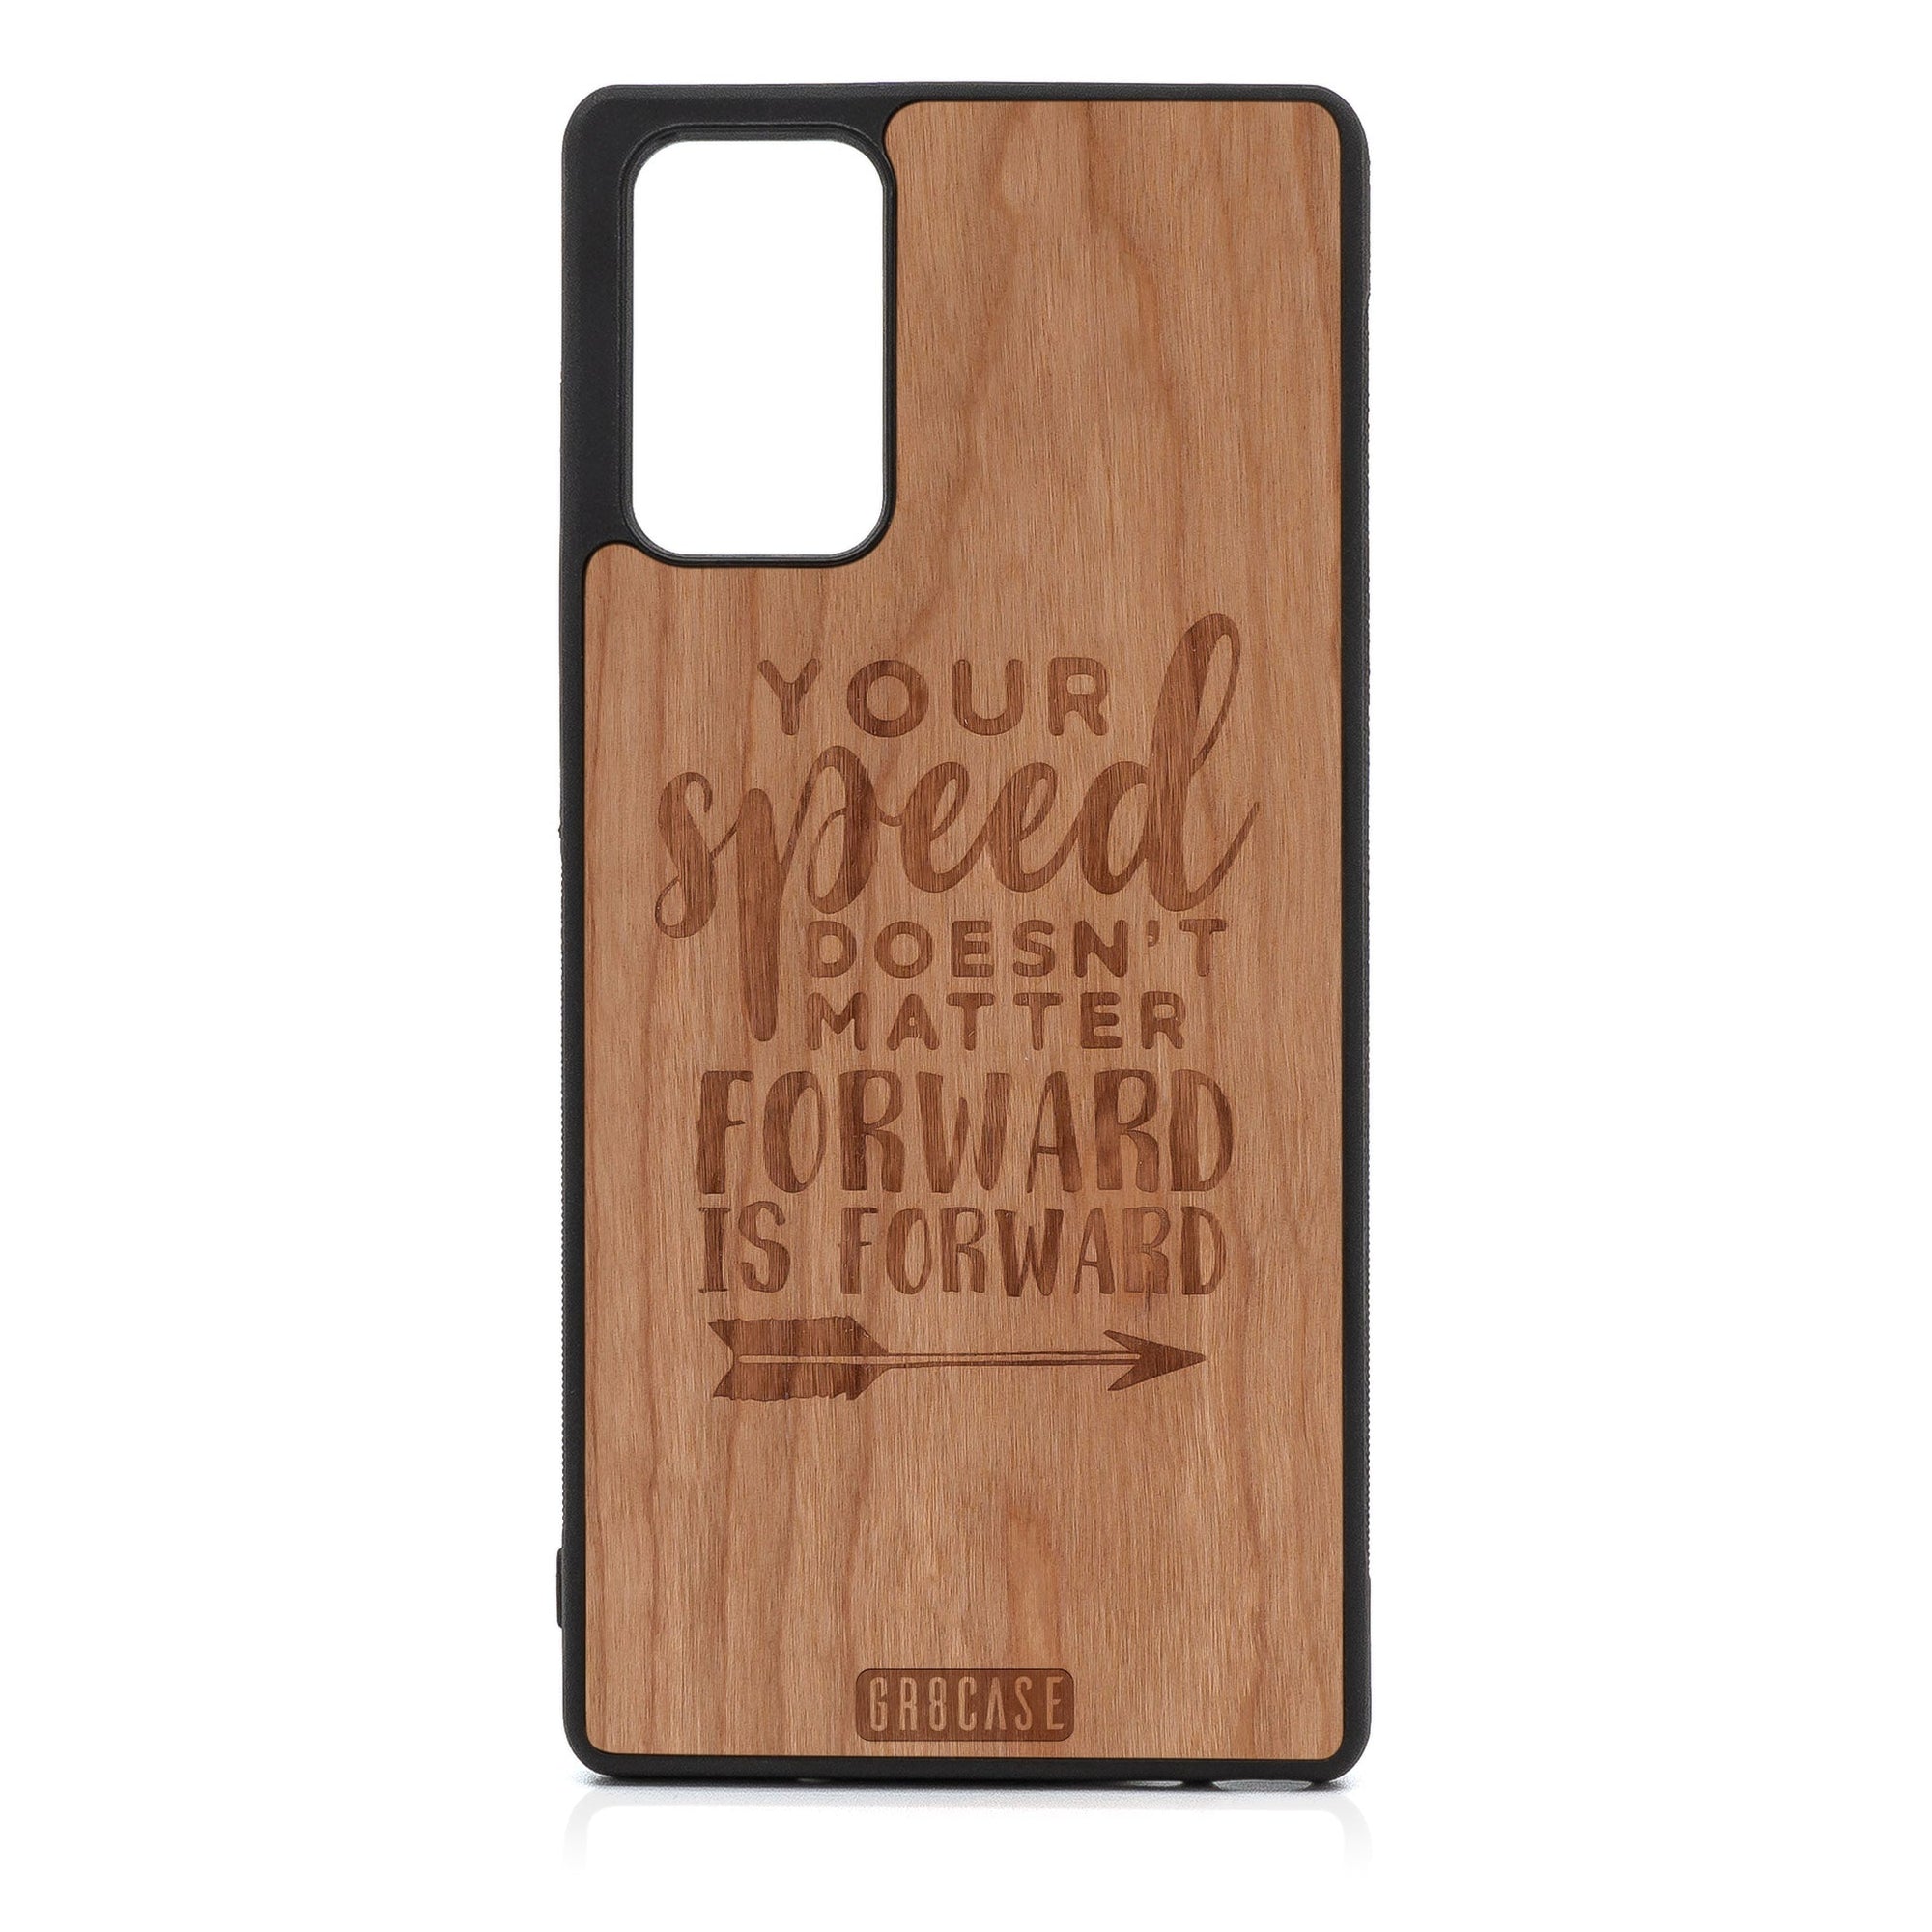 Your Speed Doesn't Matter Forward Is Forward Design Wood Case For Samsung Galaxy A52 5G